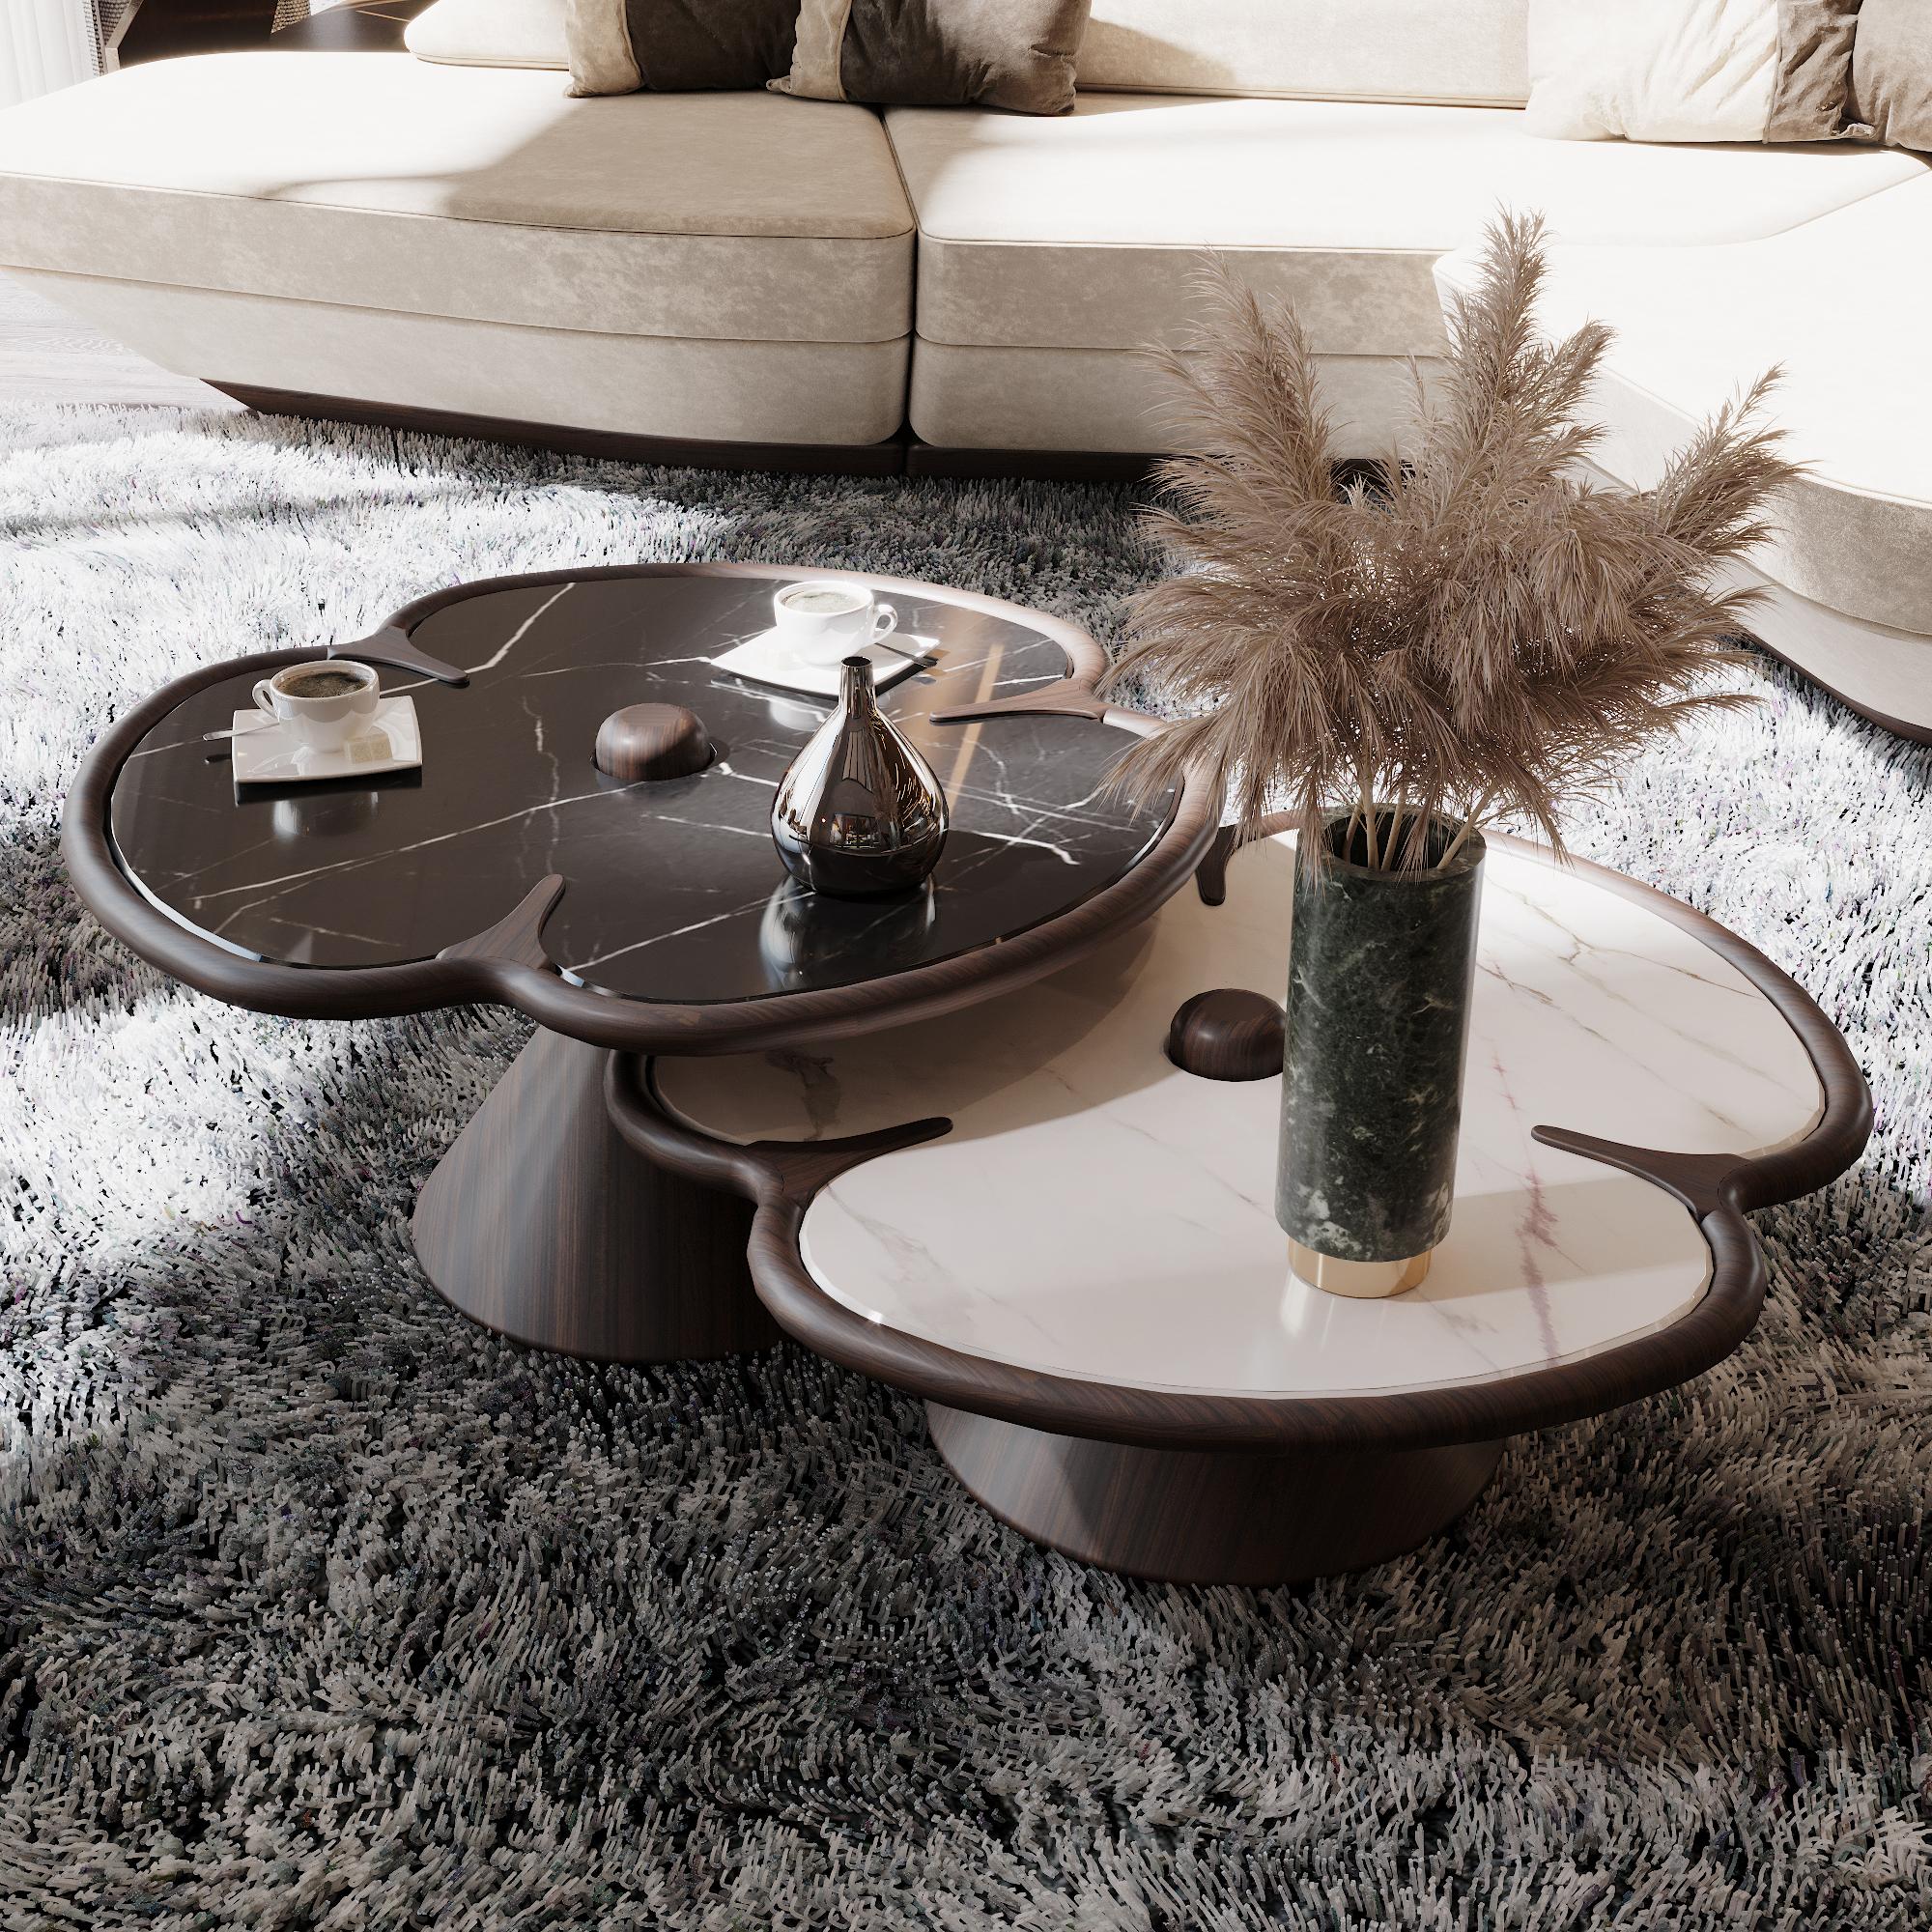 A true statement of luxury
Combining the finest and ancient craftsmanship with luxurious levels of design, quality, and comfort. 

Tallaght Coffee Table, Modern Collection, Black lacquered Wood, Nero marquina Marble polished - Traditional